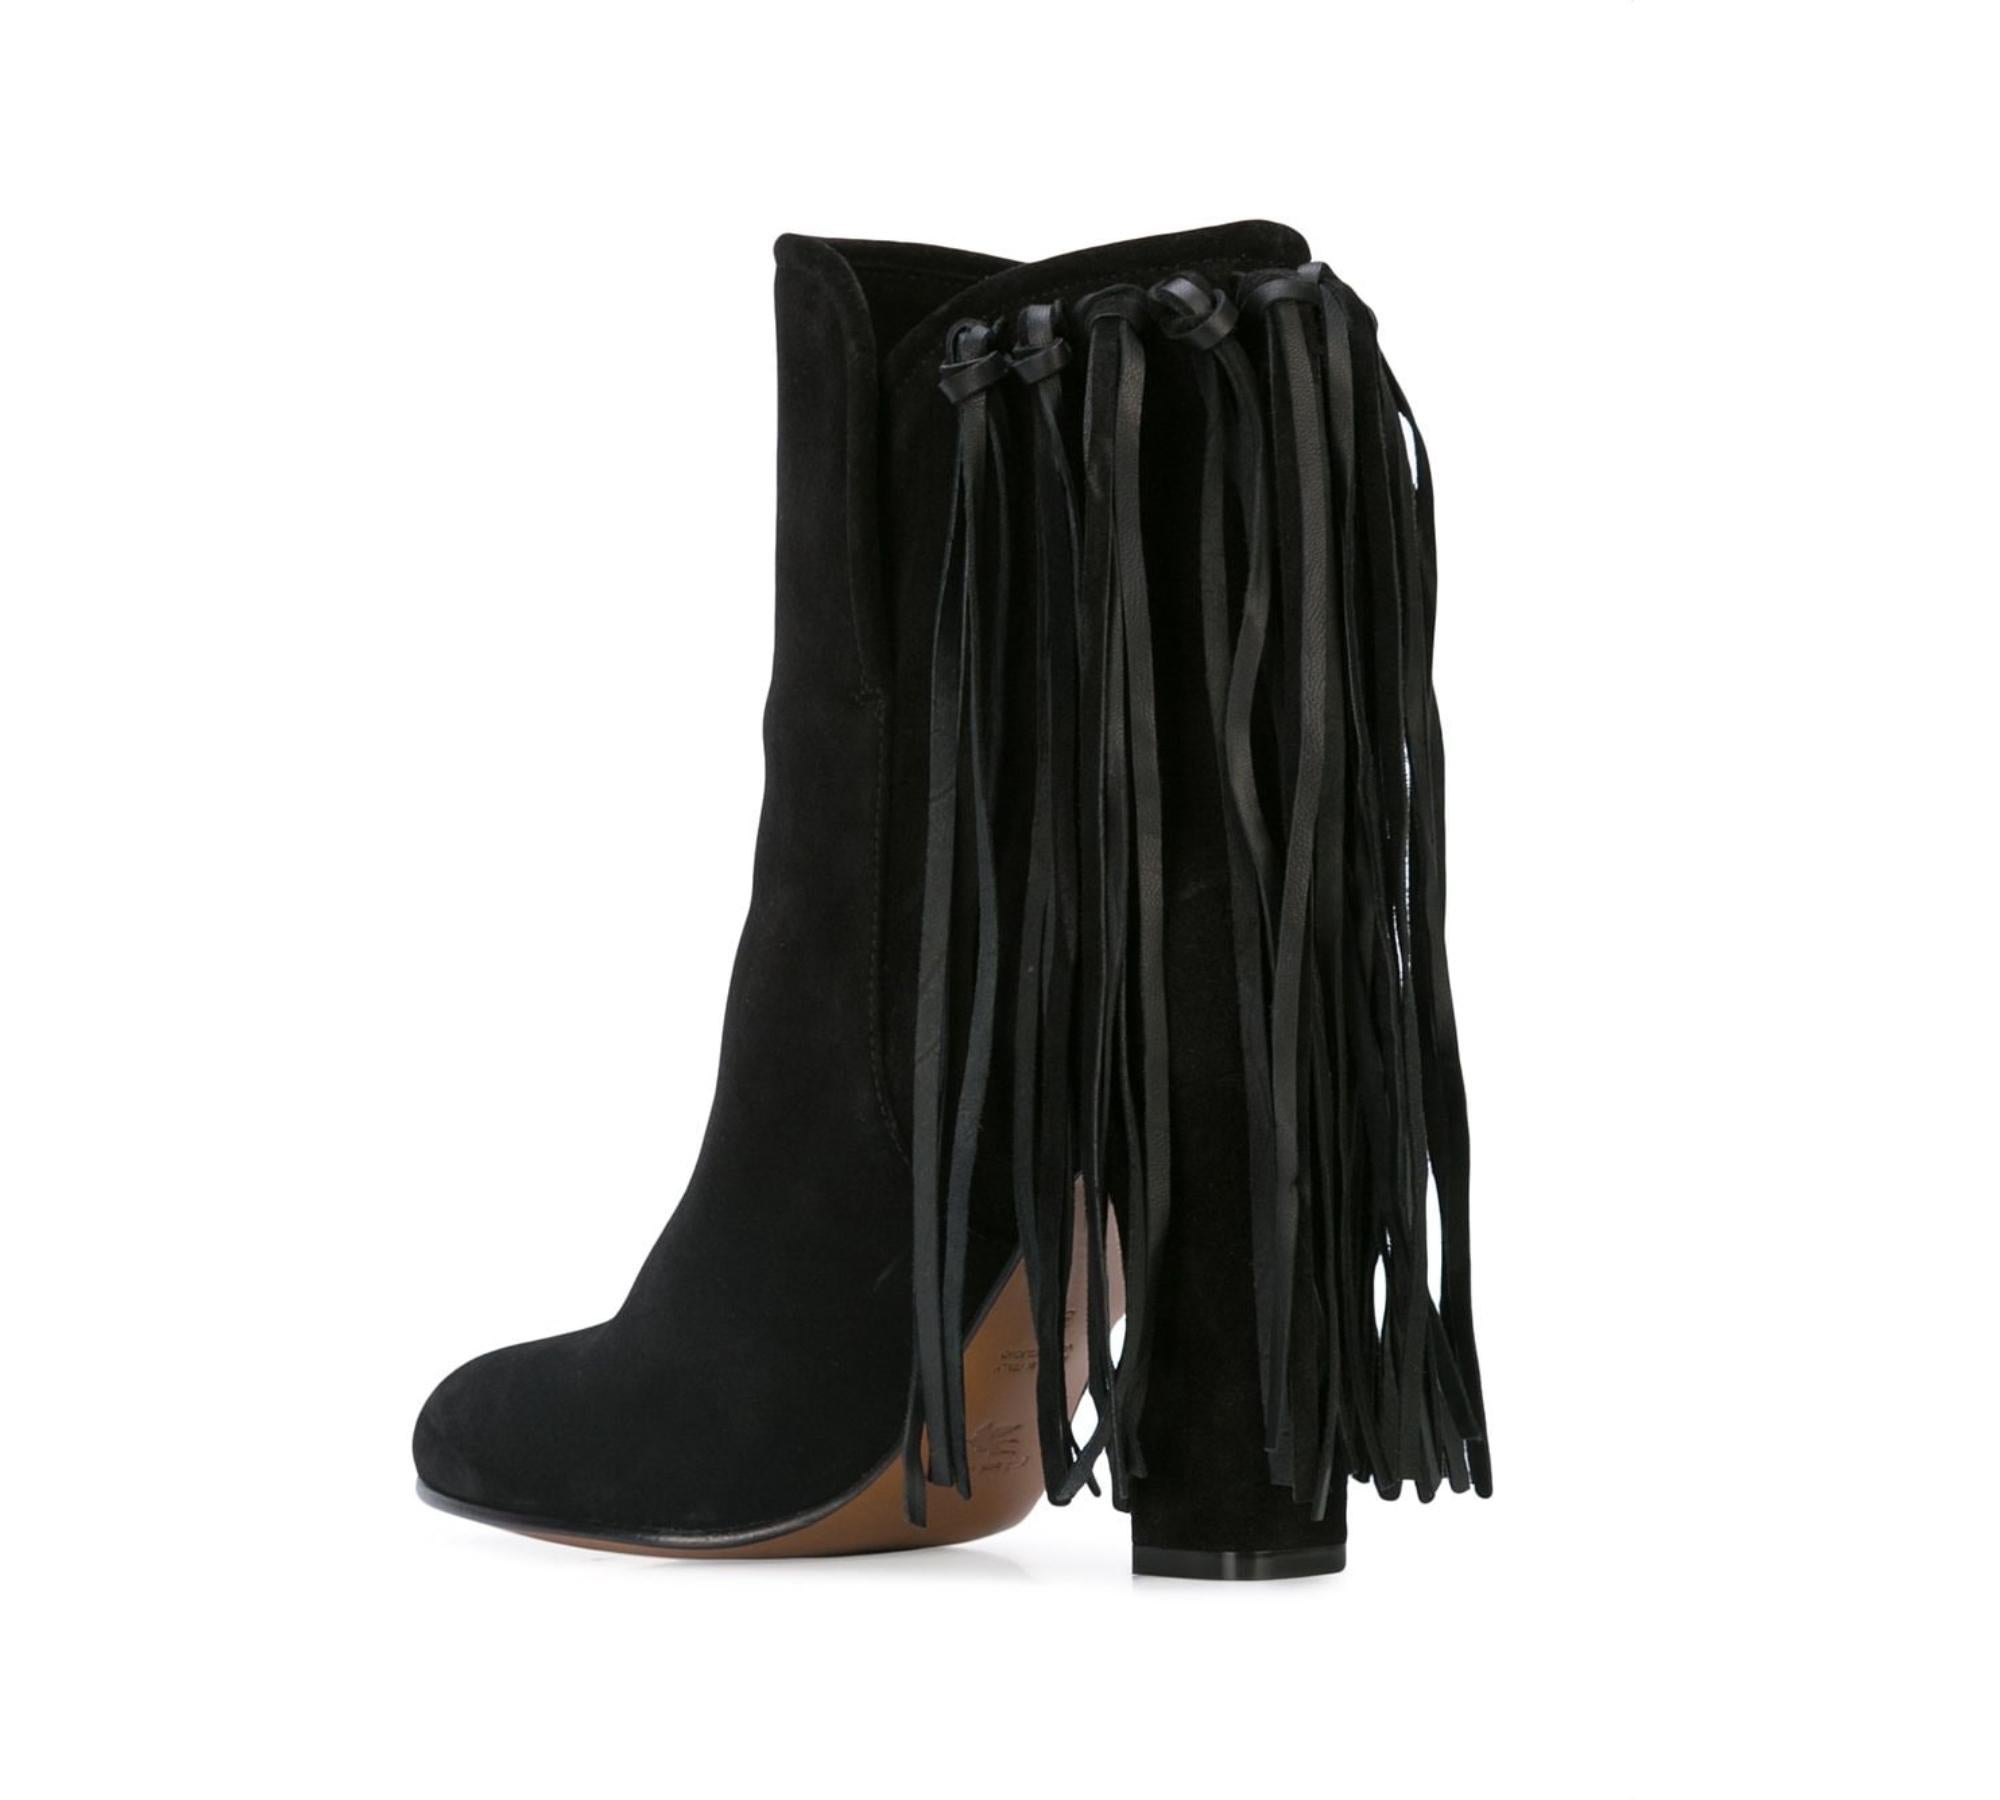 The Etro black suede ankle booties feature a fringed detailing, round toe, and a high block heel. A must-have boot to complete any boho-chic look. Brand new. Made in Italy.

Size: 38 (IT)

Material: Lining- Leather 100% / Sole- Leather 100% / Outer-